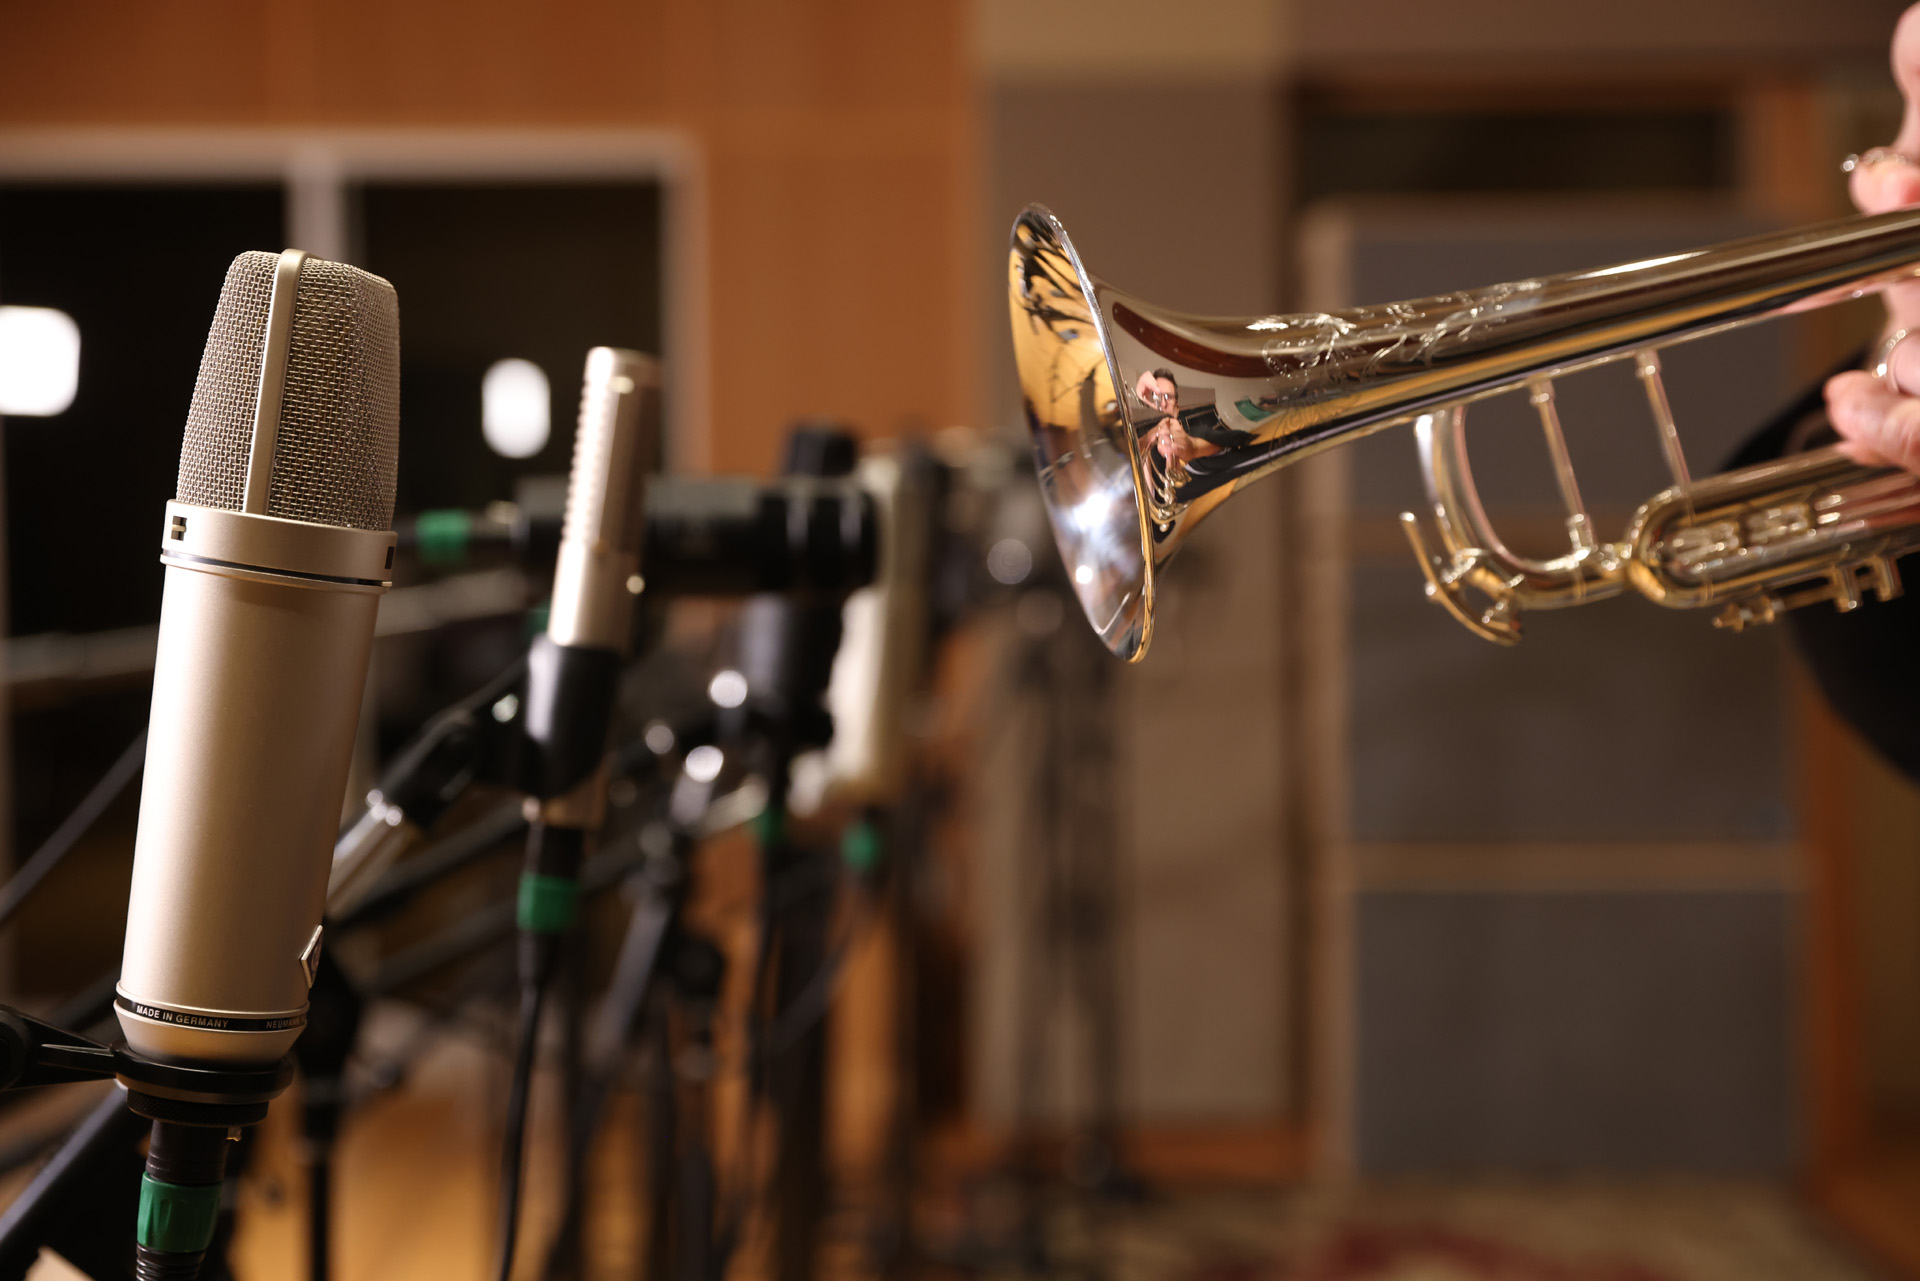 Ewell hoogte Een trouwe Trumpet Mic Shootout - with Sound Samples